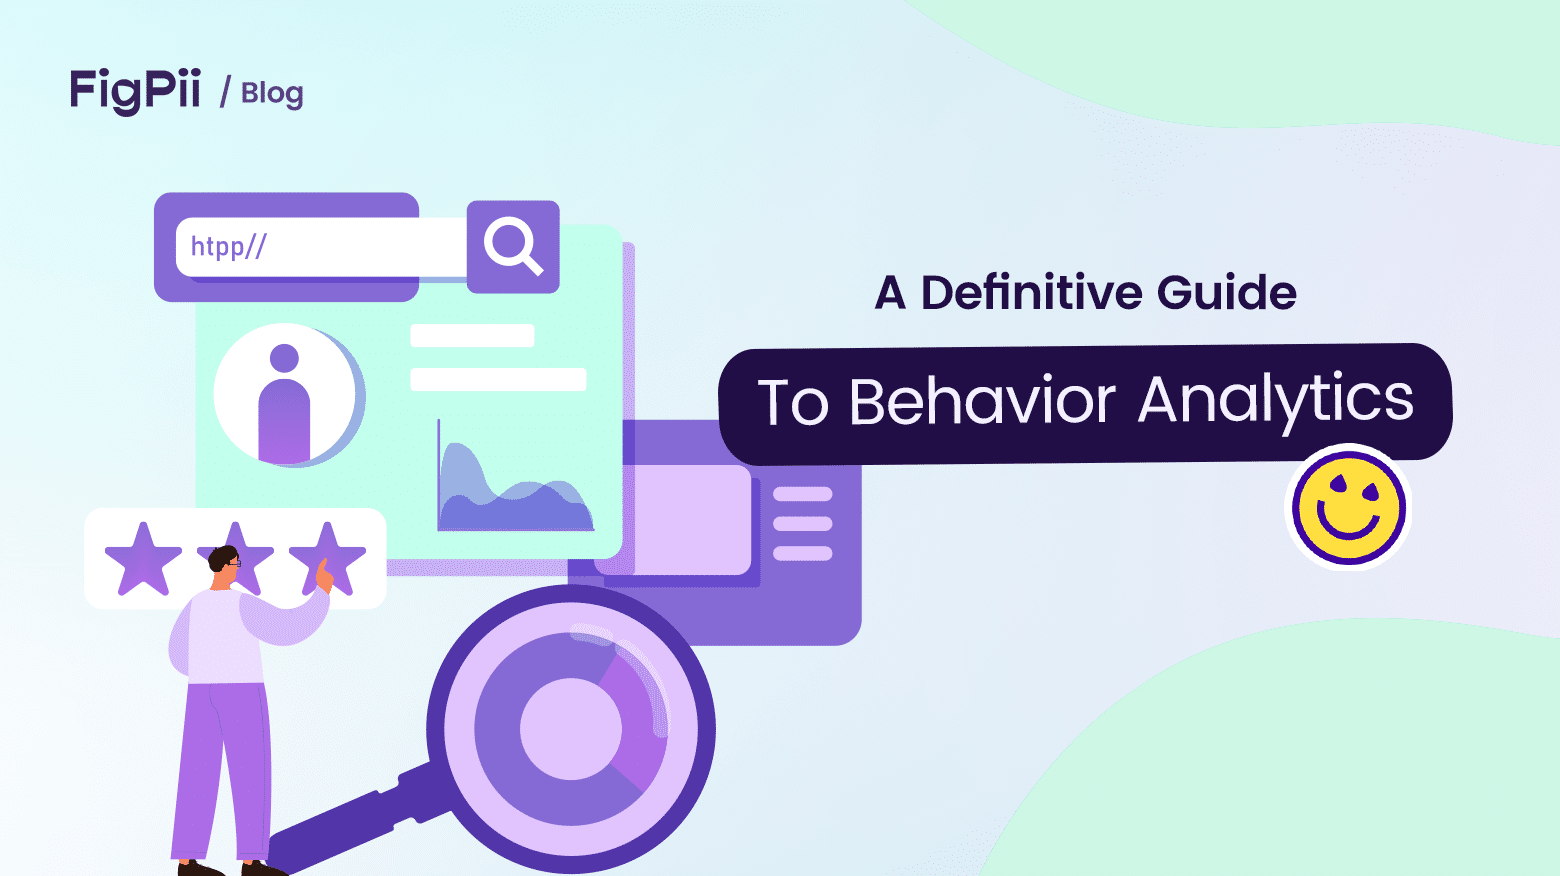 A definitive guide to behavioral analytics